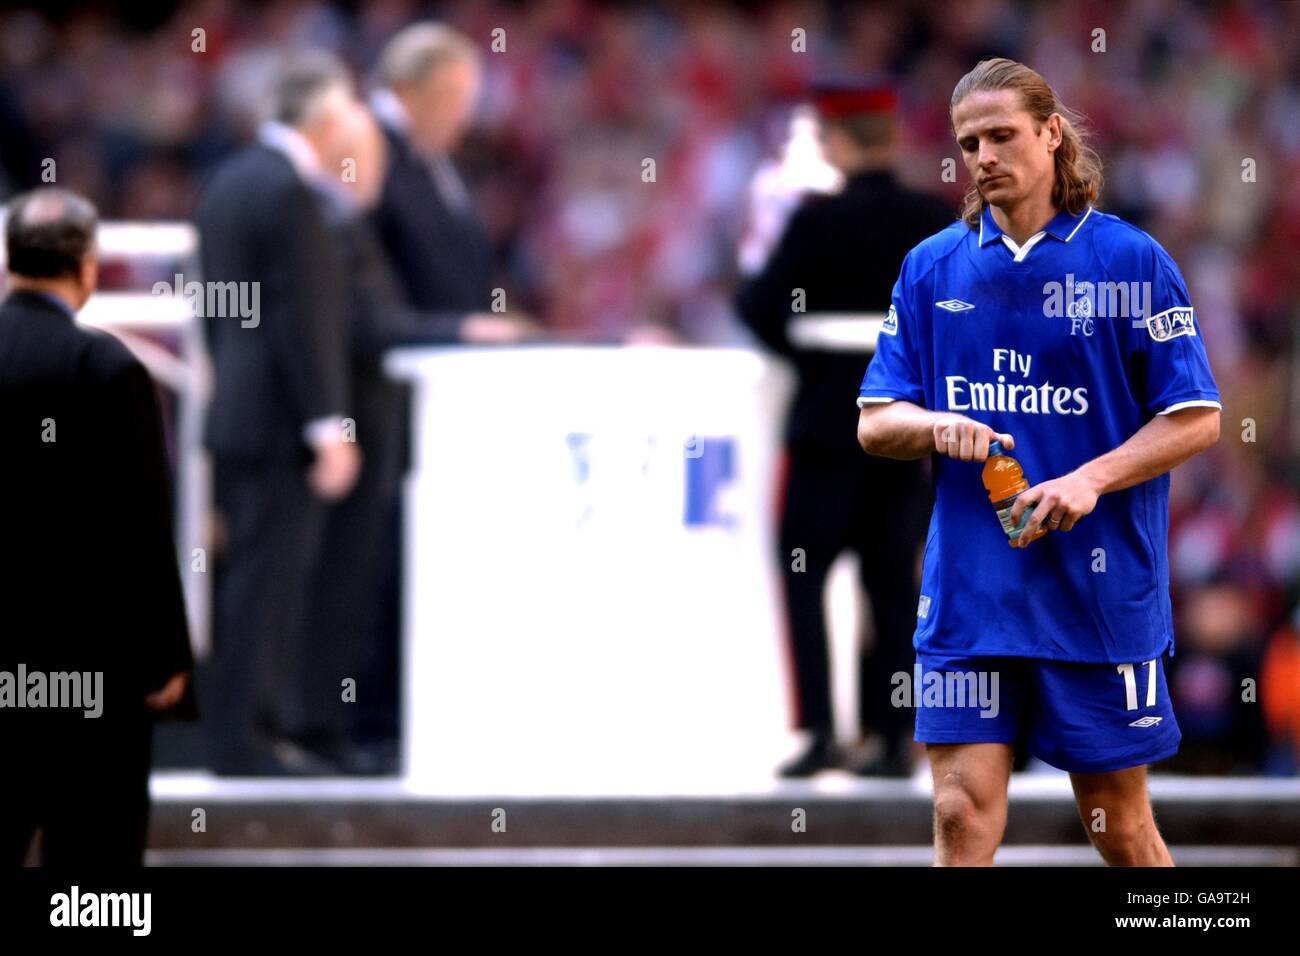 Soccer - AXA FA Cup Final - Arsenal v Chelsea. Chelsea's Emmanuel Petit walks from the pitch with the disappointment of defeat etched on his face Stock Photo